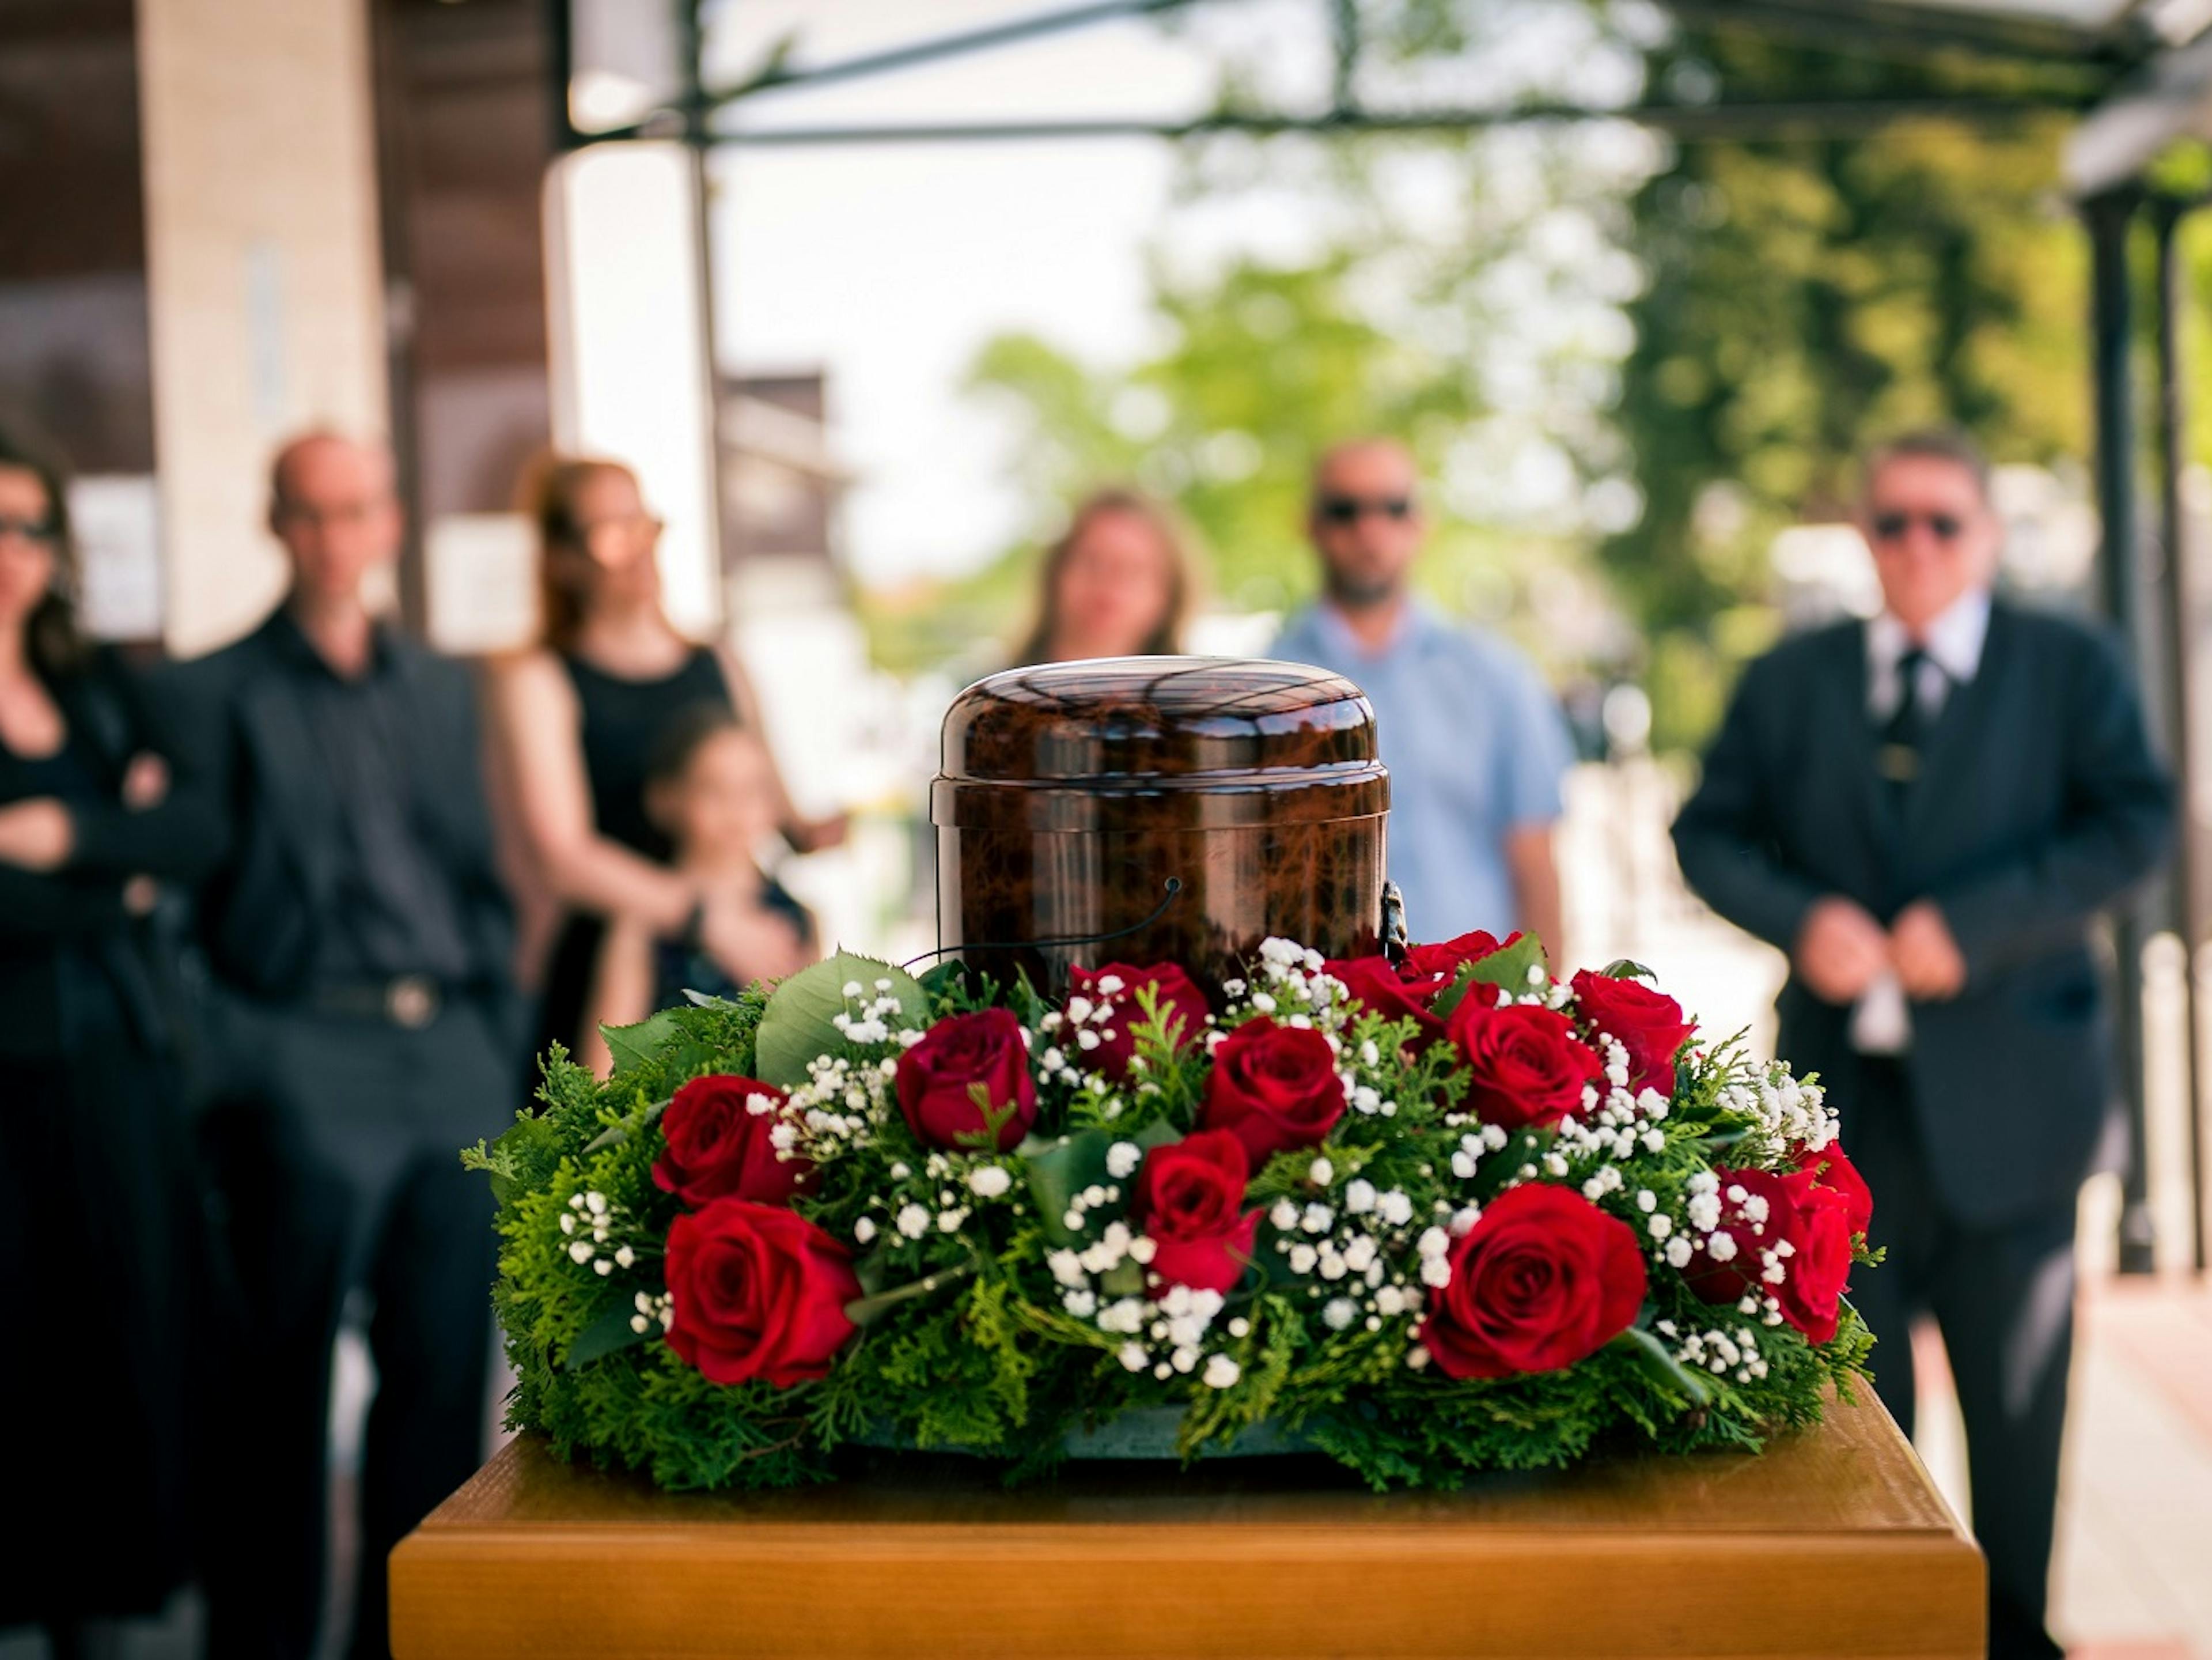 Does Medicare Cover Funeral Expenses?